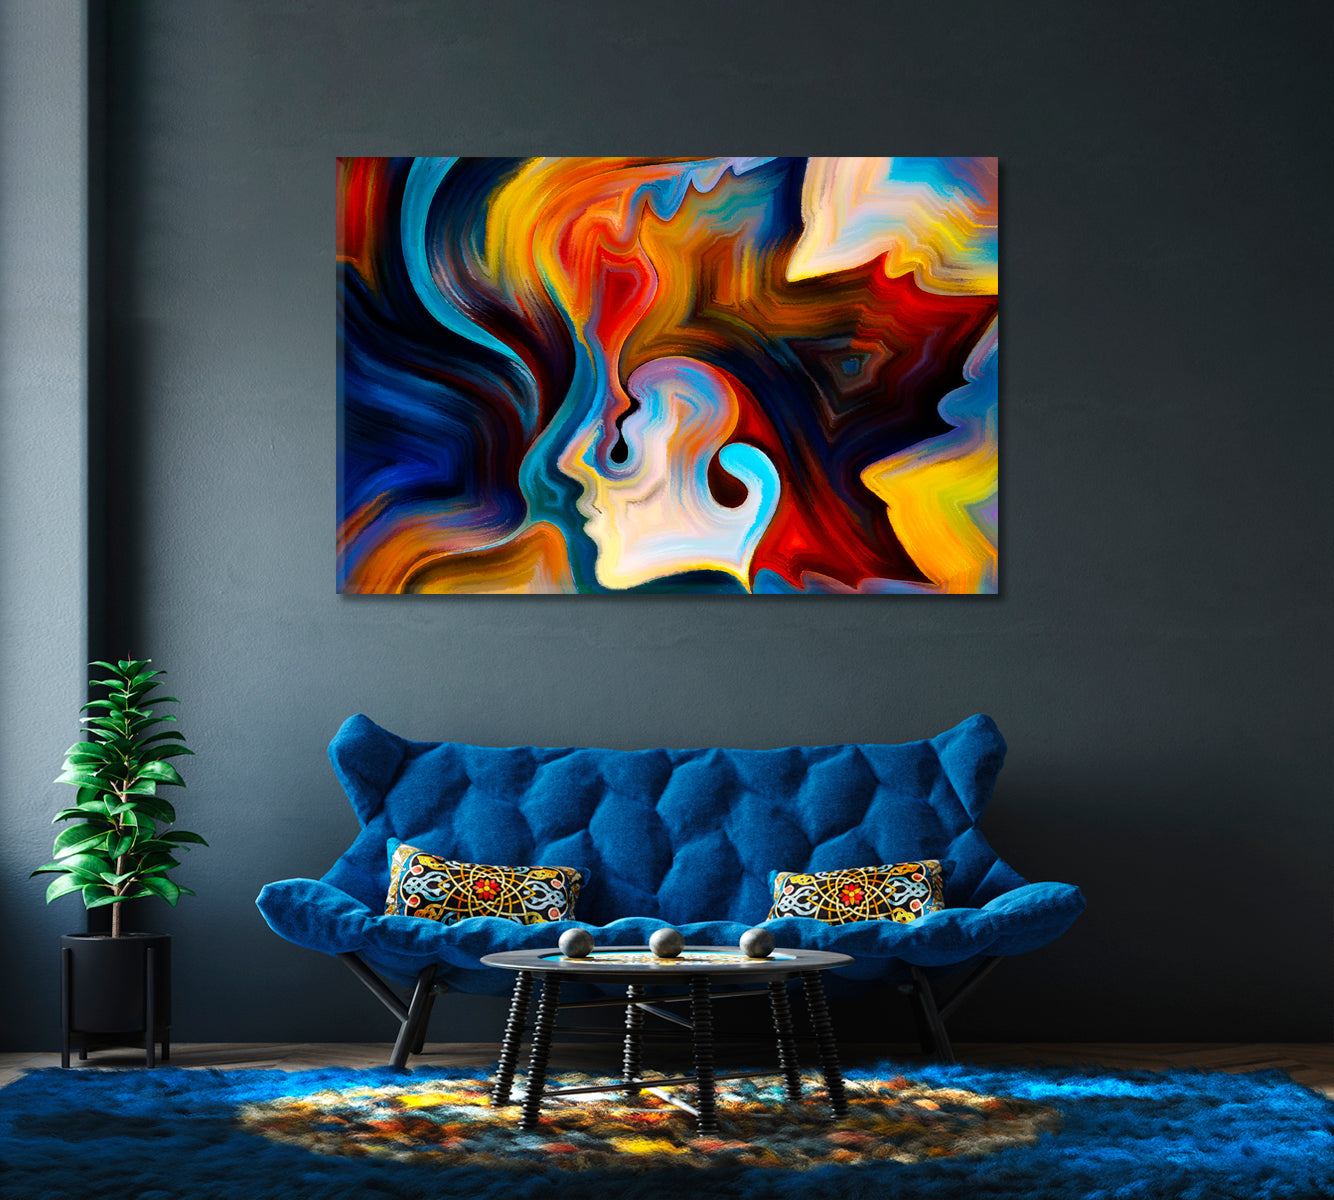 Rich Colors Of Fate Abstract Art Print Artesty 1 panel 24" x 16" 